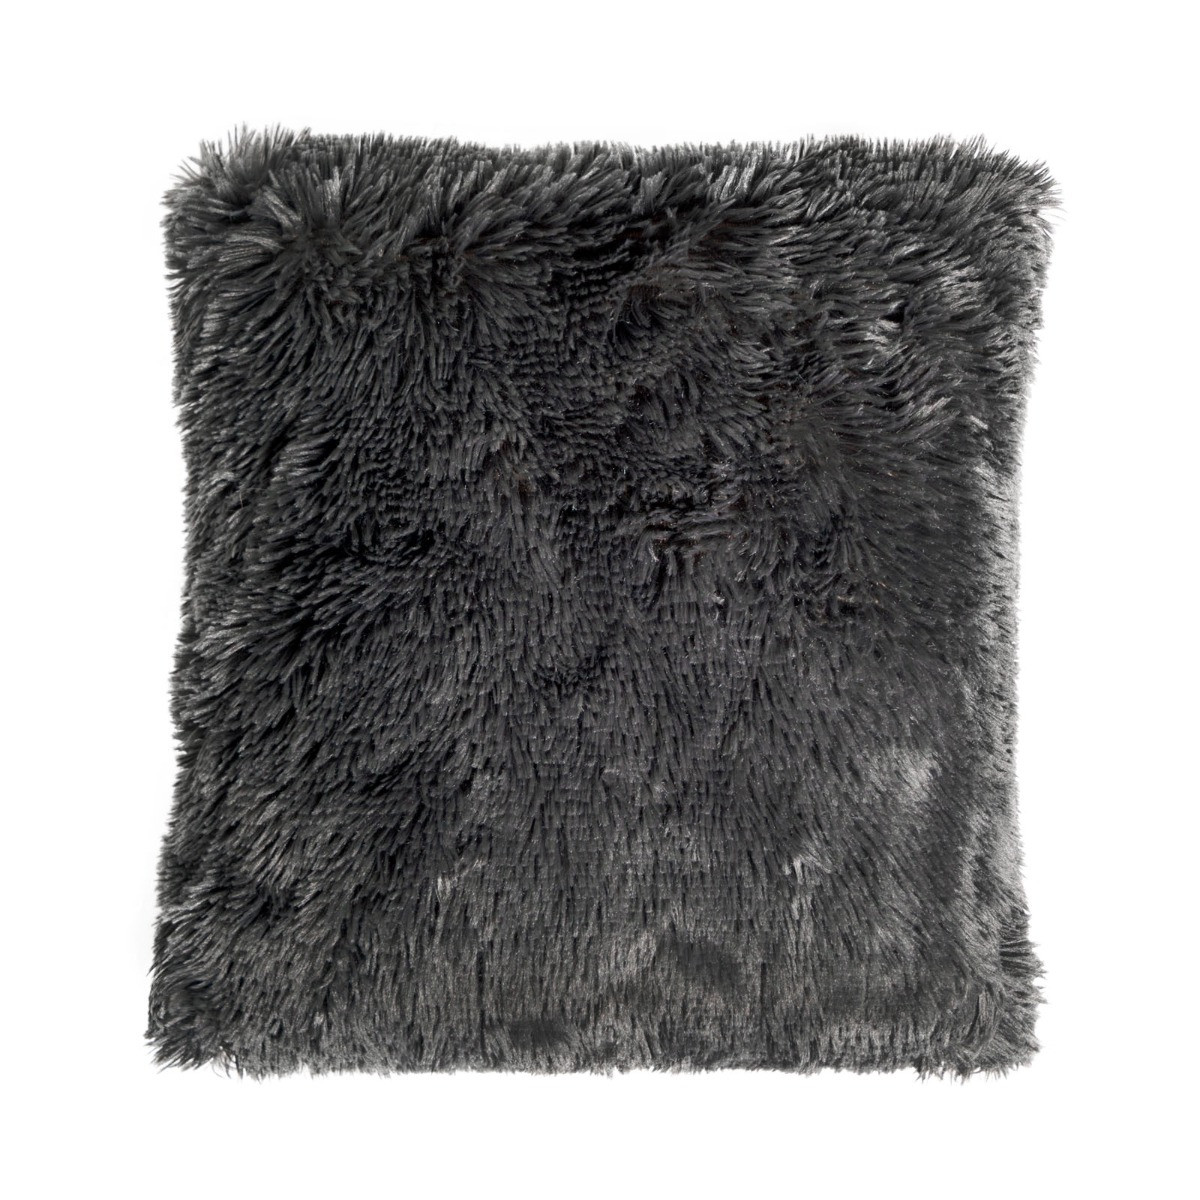 Sienna Fluffy Cushion Covers - Charcoal>